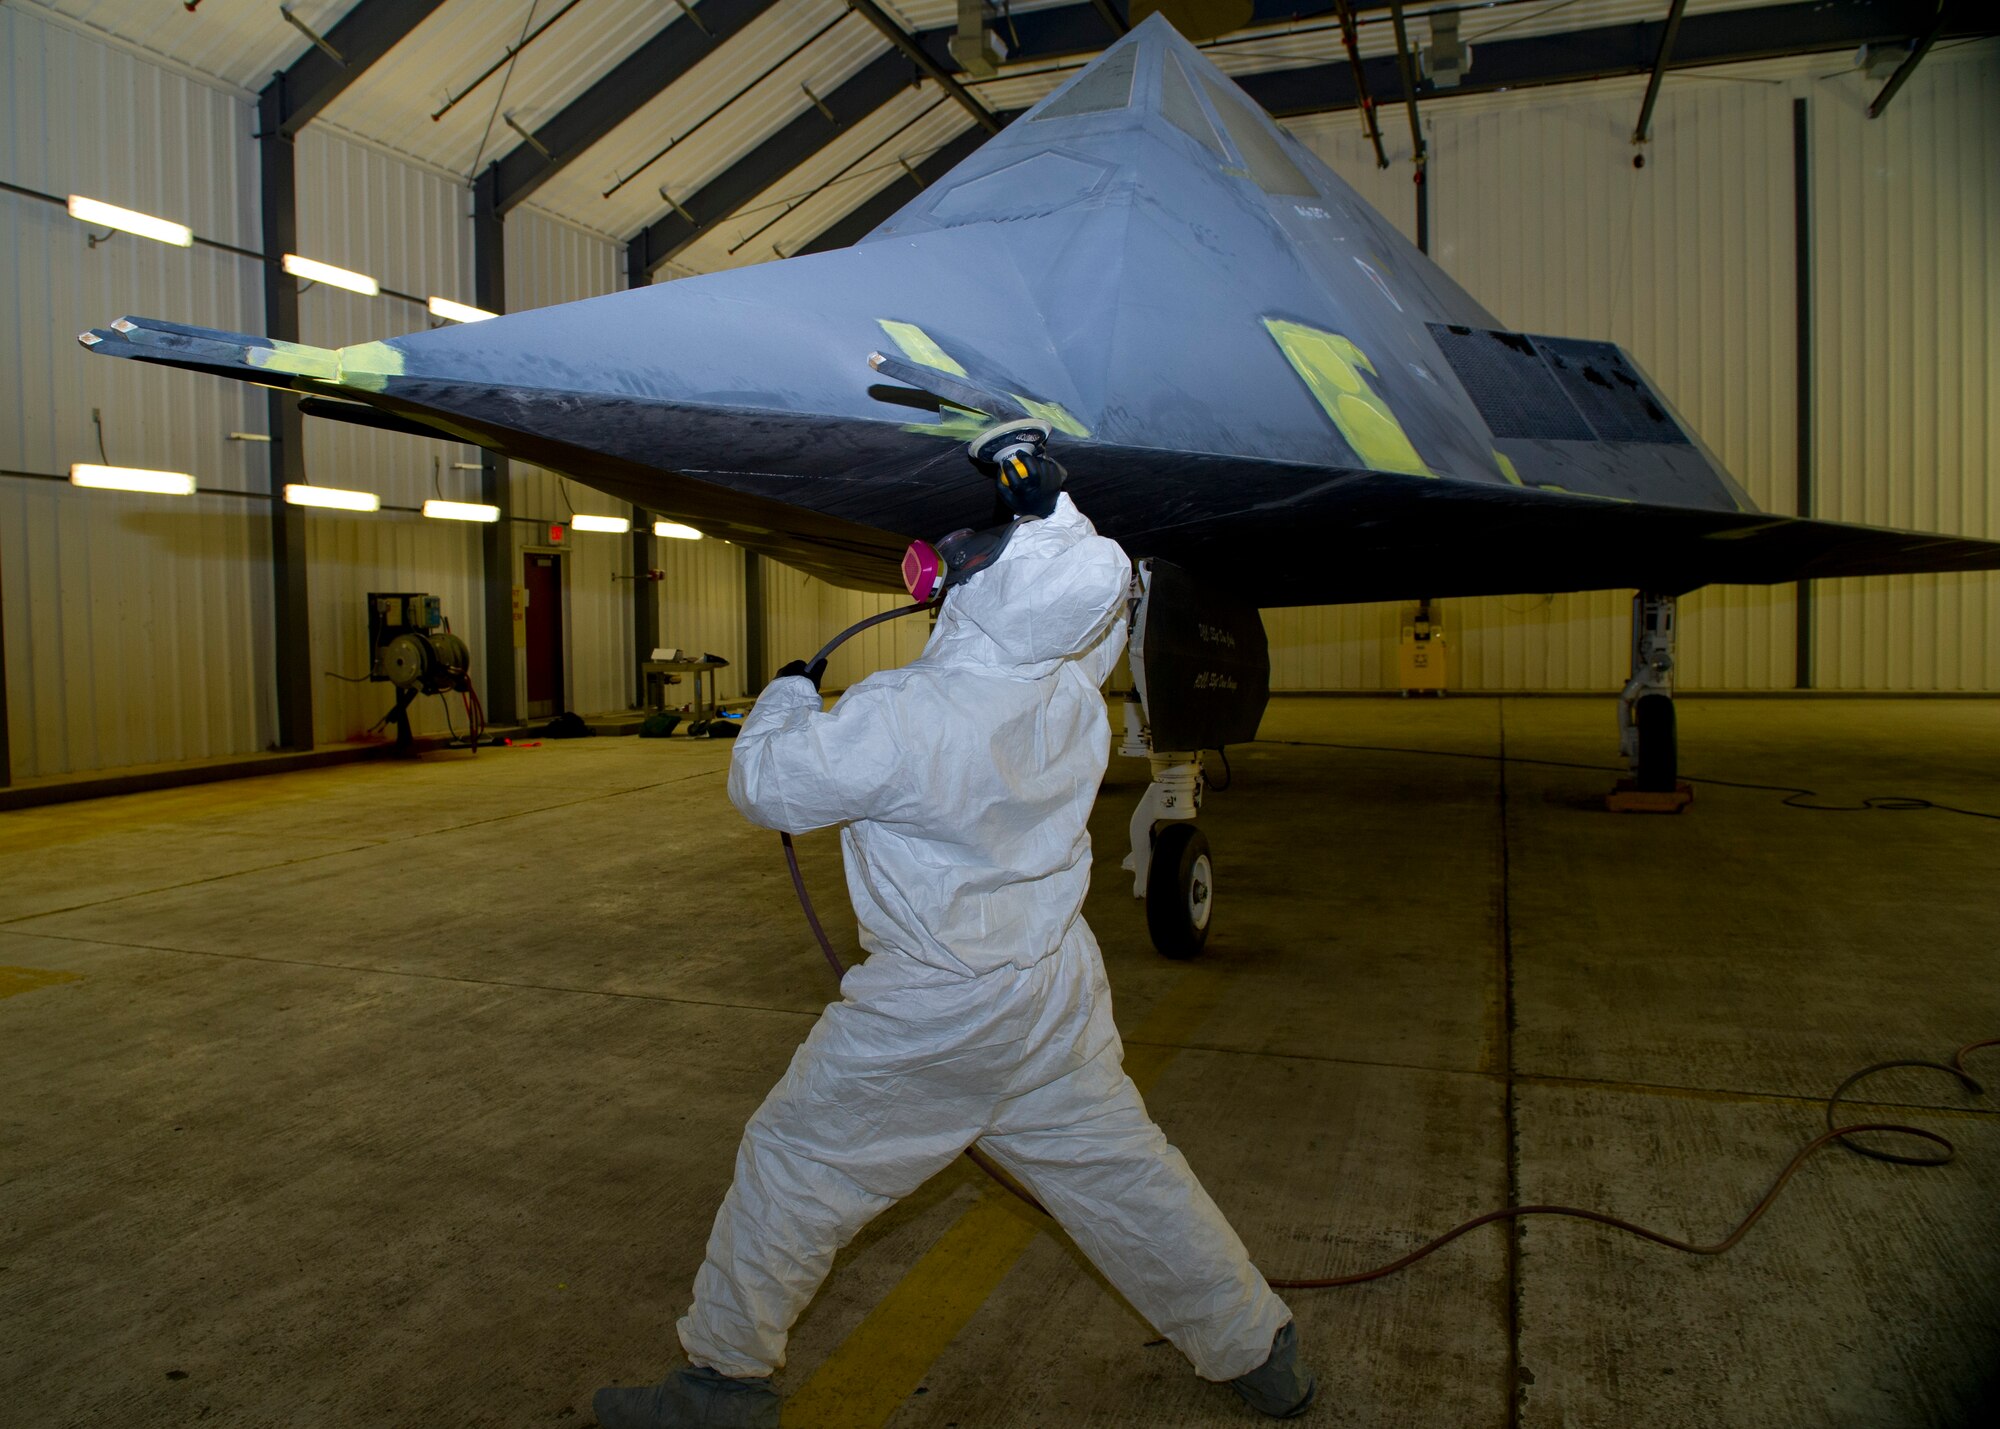 Staff Sgt. Julian Arroyo from the 49th Maintenance Squadron, fabrication flight, sands the F-117 at Holloman Air Force Base, N.M., March 13. The F-117 has been on static display in Holloman’s Heritage Park since its retirement in 2008. Due to sun and inclement weather damage, the 49 MXS removed and towed the aircraft to the hangar to begin the restoration process. Airmen will perform structural maintenance on the Nighthawk and give the aircraft a fresh paint job before returning it for display in Heritage Park. (U.S. Air Force photo by Airman 1st Class Leah Ferrante/Released)